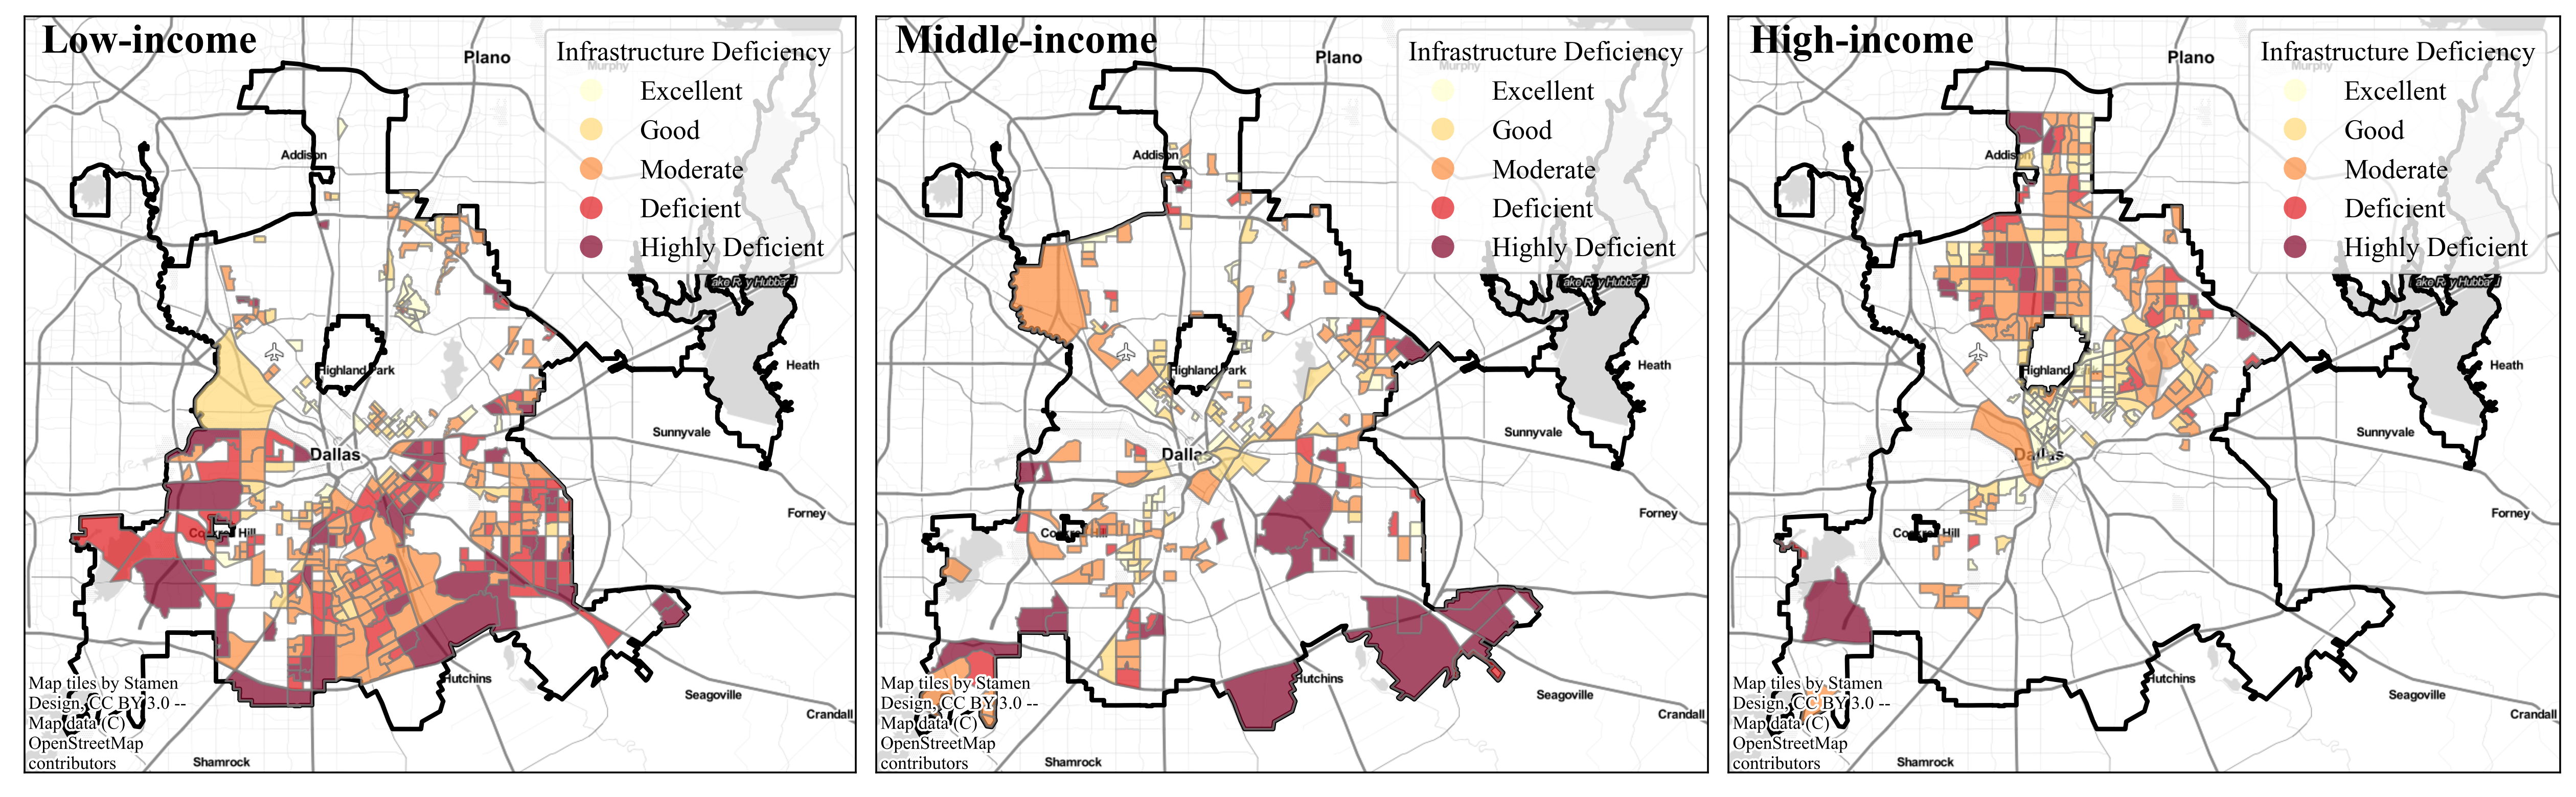 Income Deficiency Maps